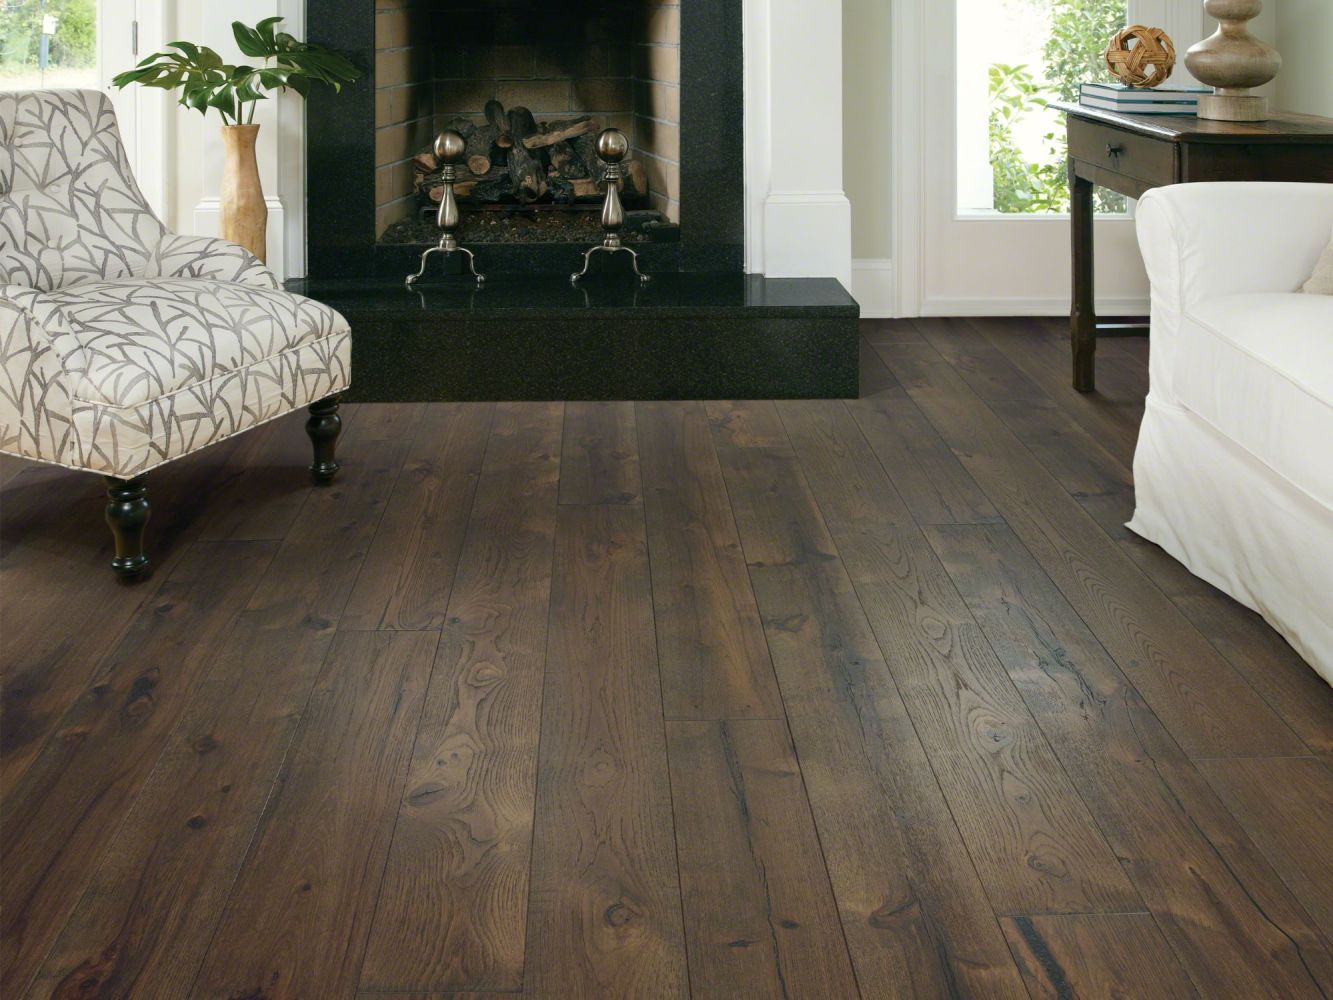 Shaw Floors Repel Hardwood Reflections Hickory Majestic 09023_SW673